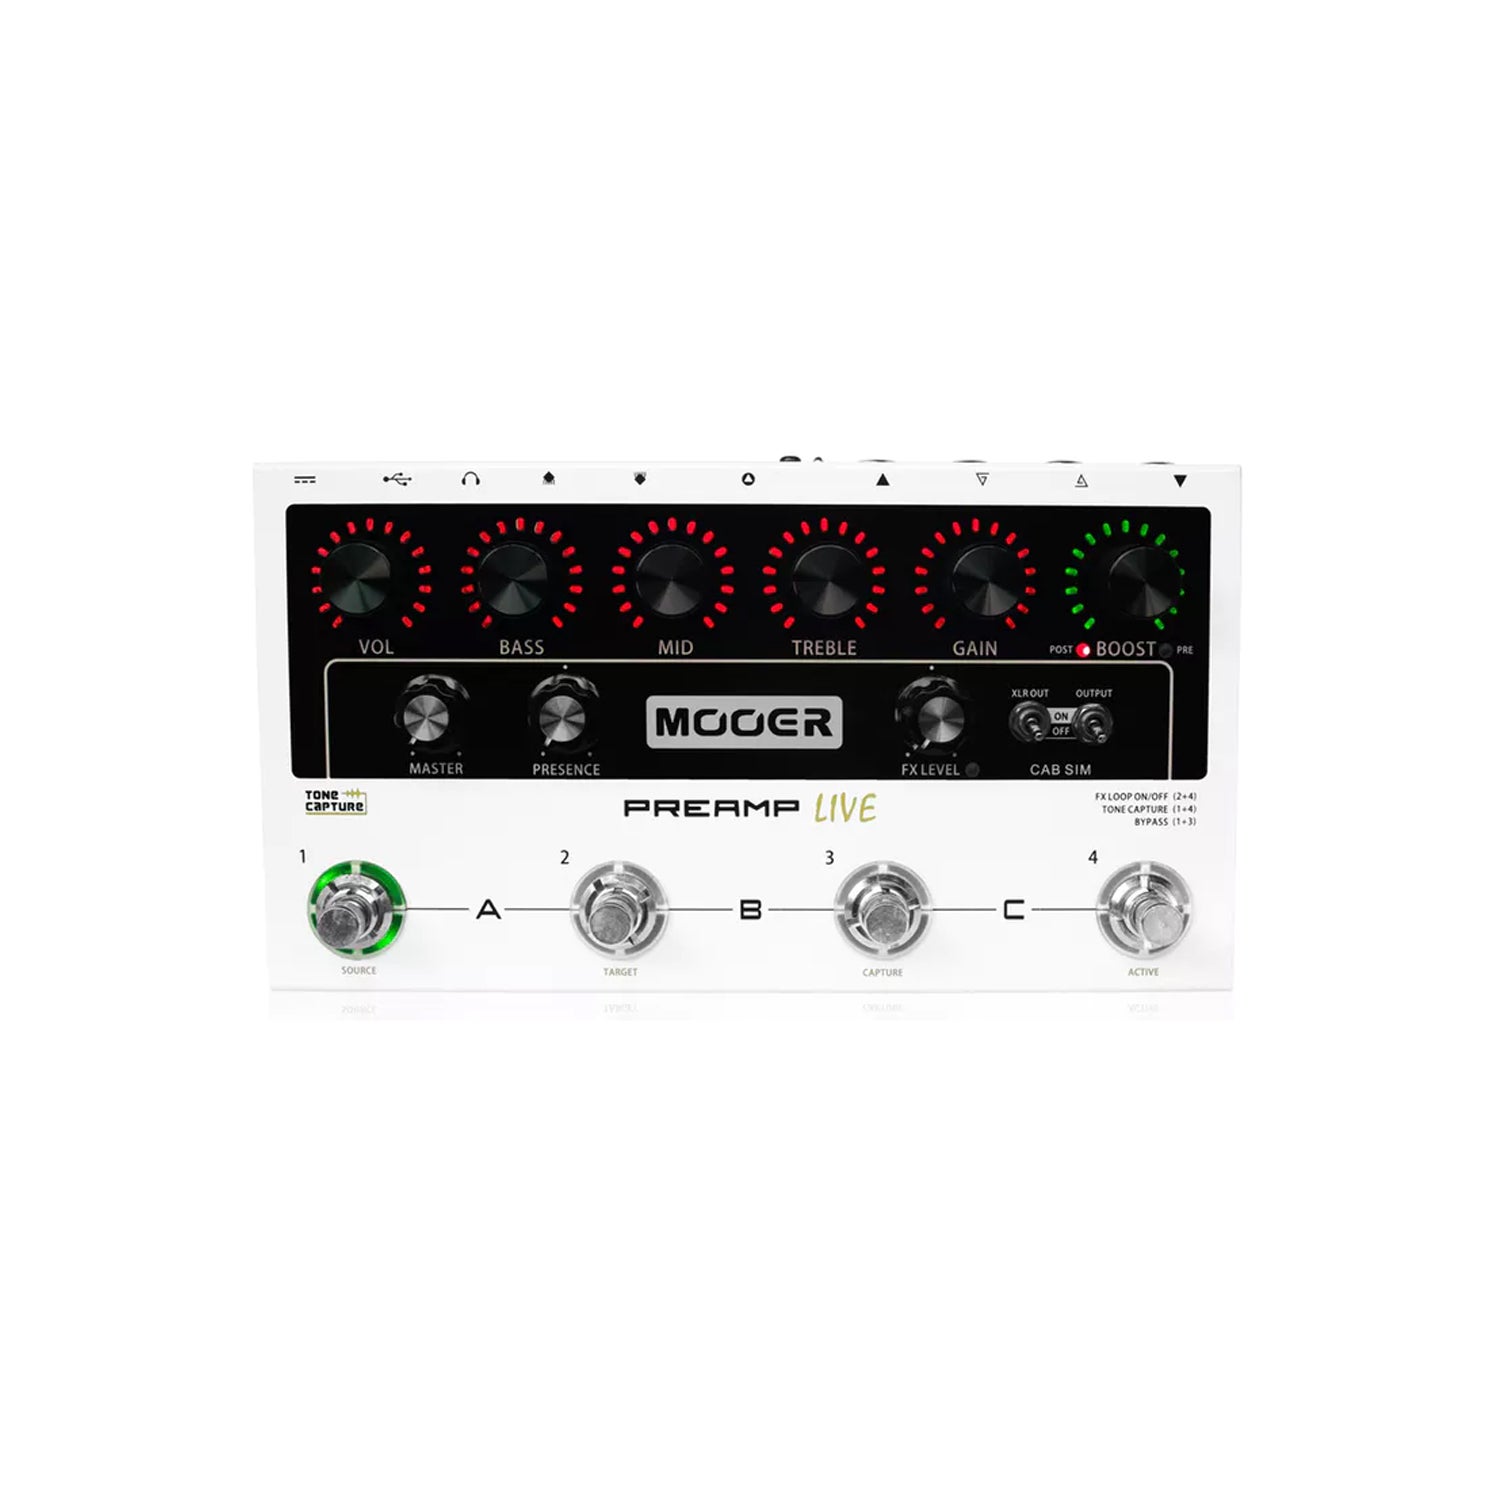 Mooer Preamplive Digital Audio Preamp M999 | Music Works